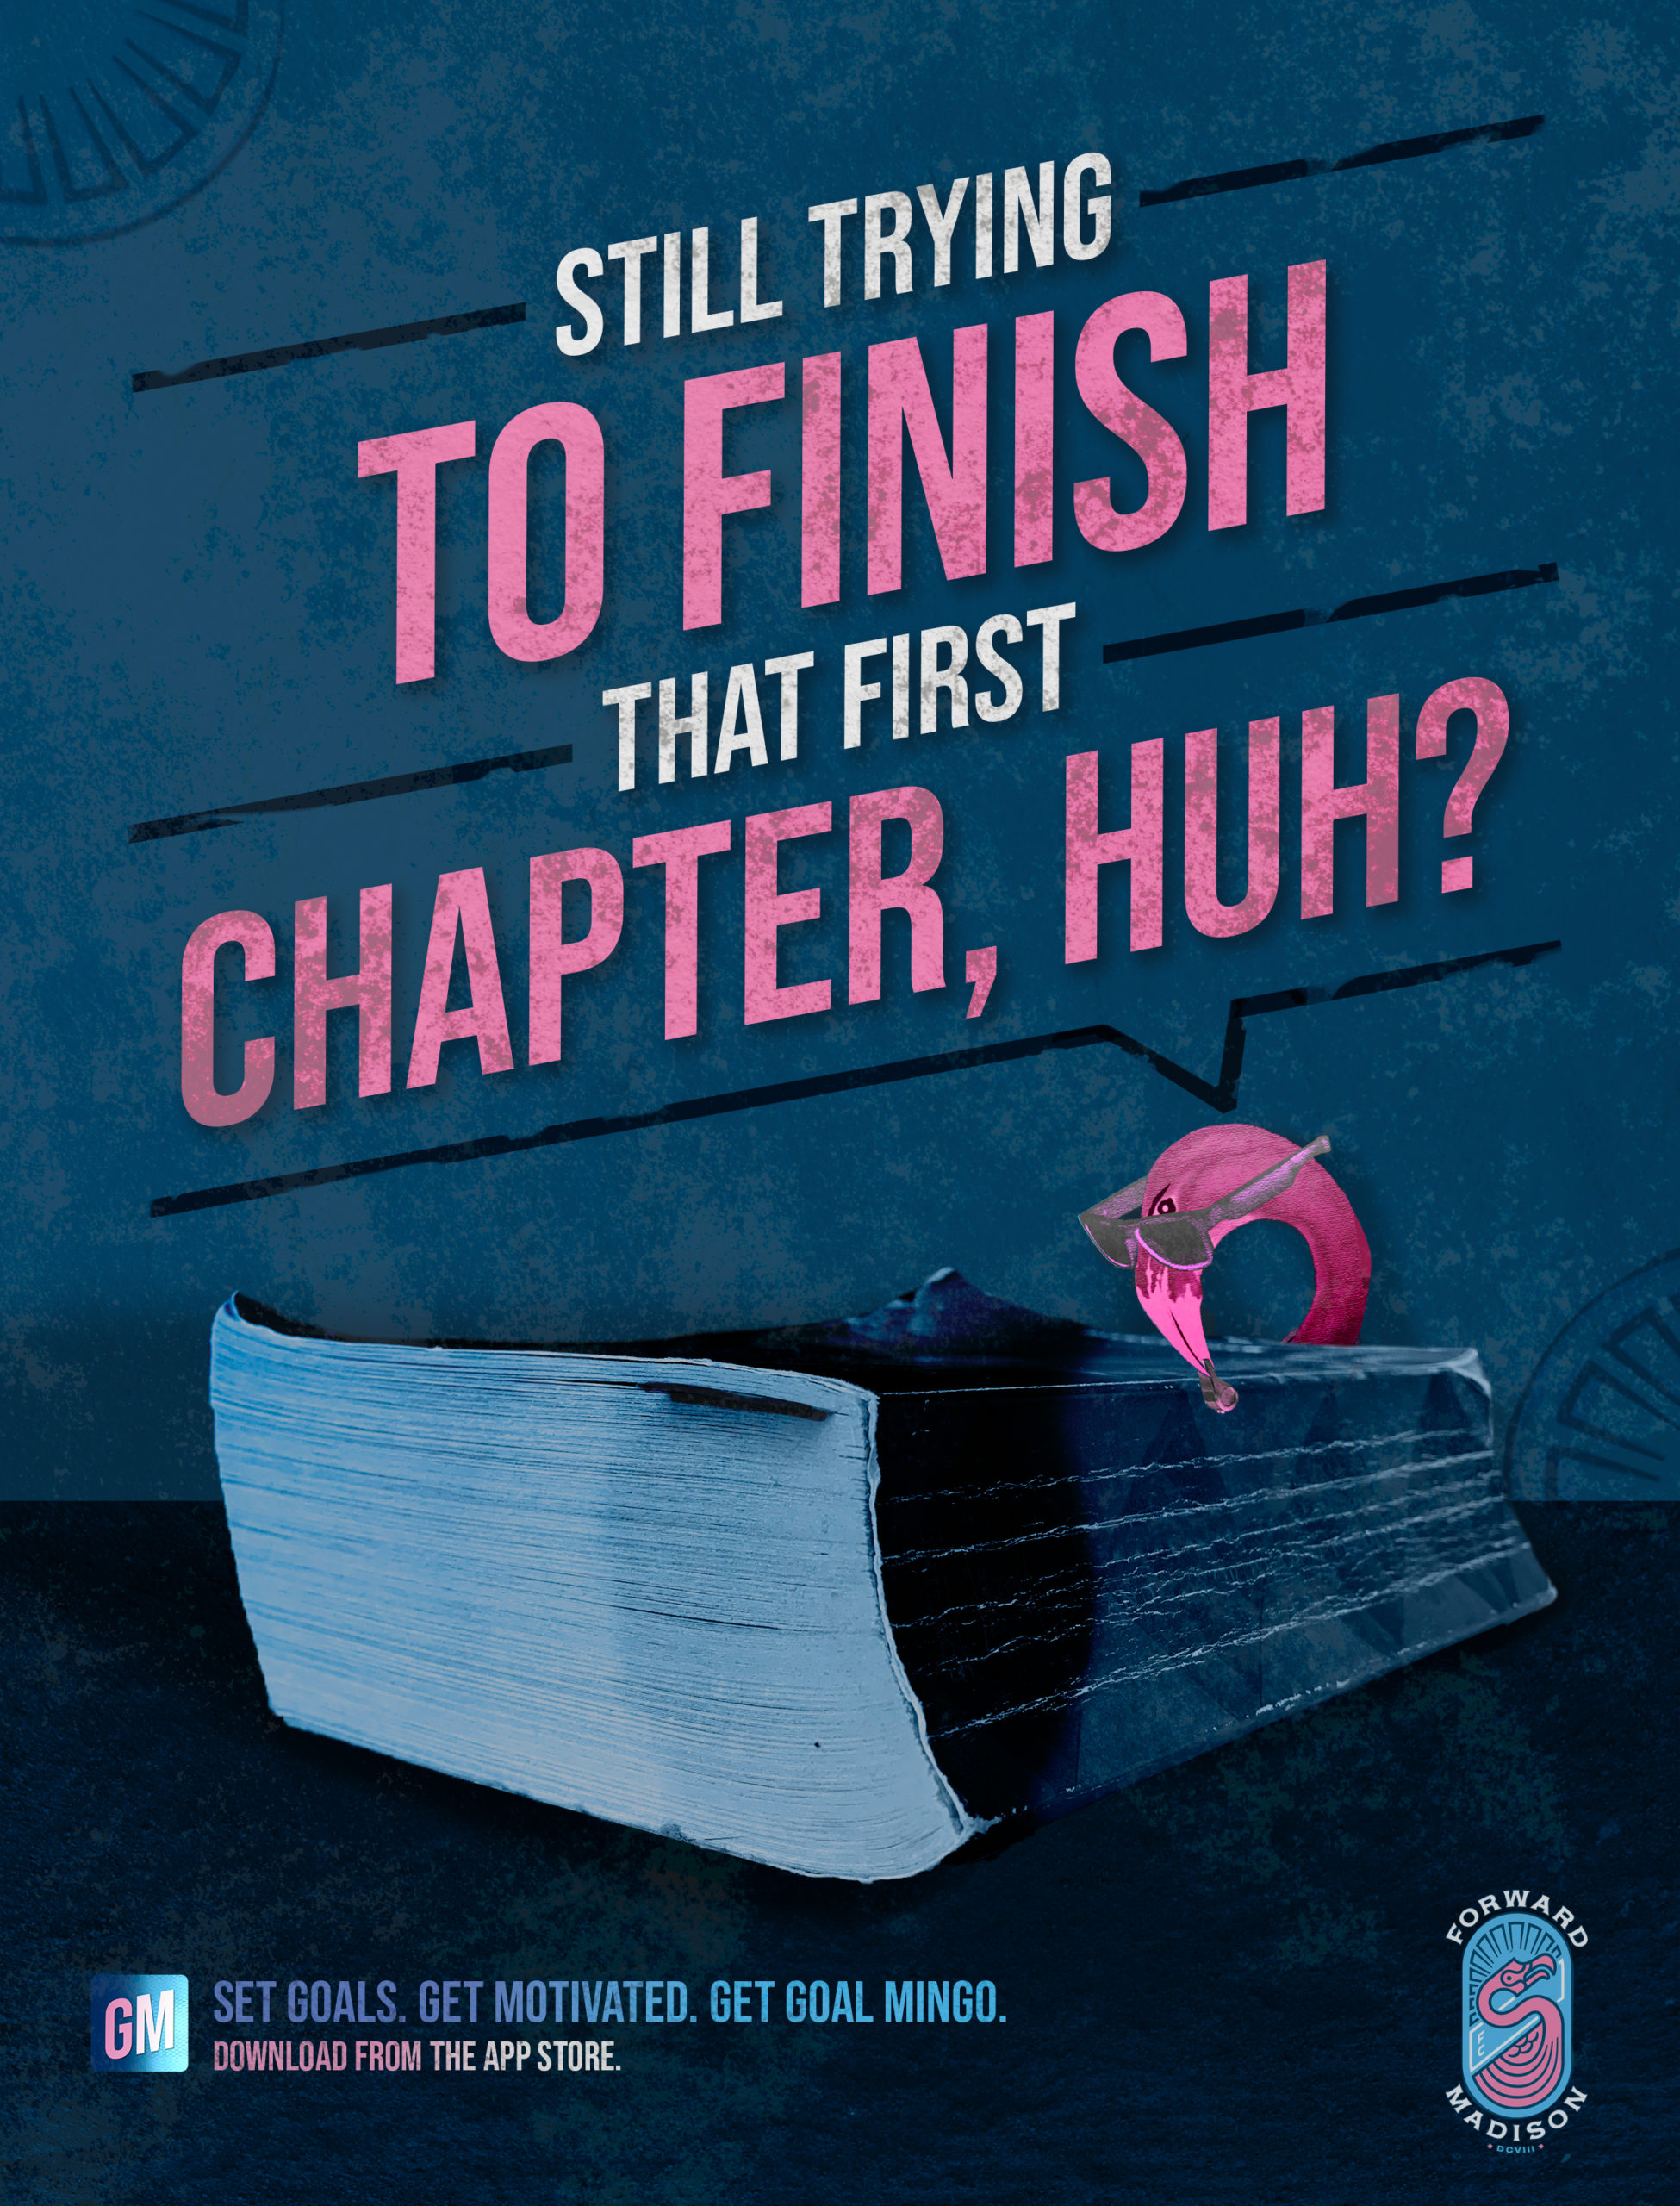 Still Trying to finish that first chapter, huh?